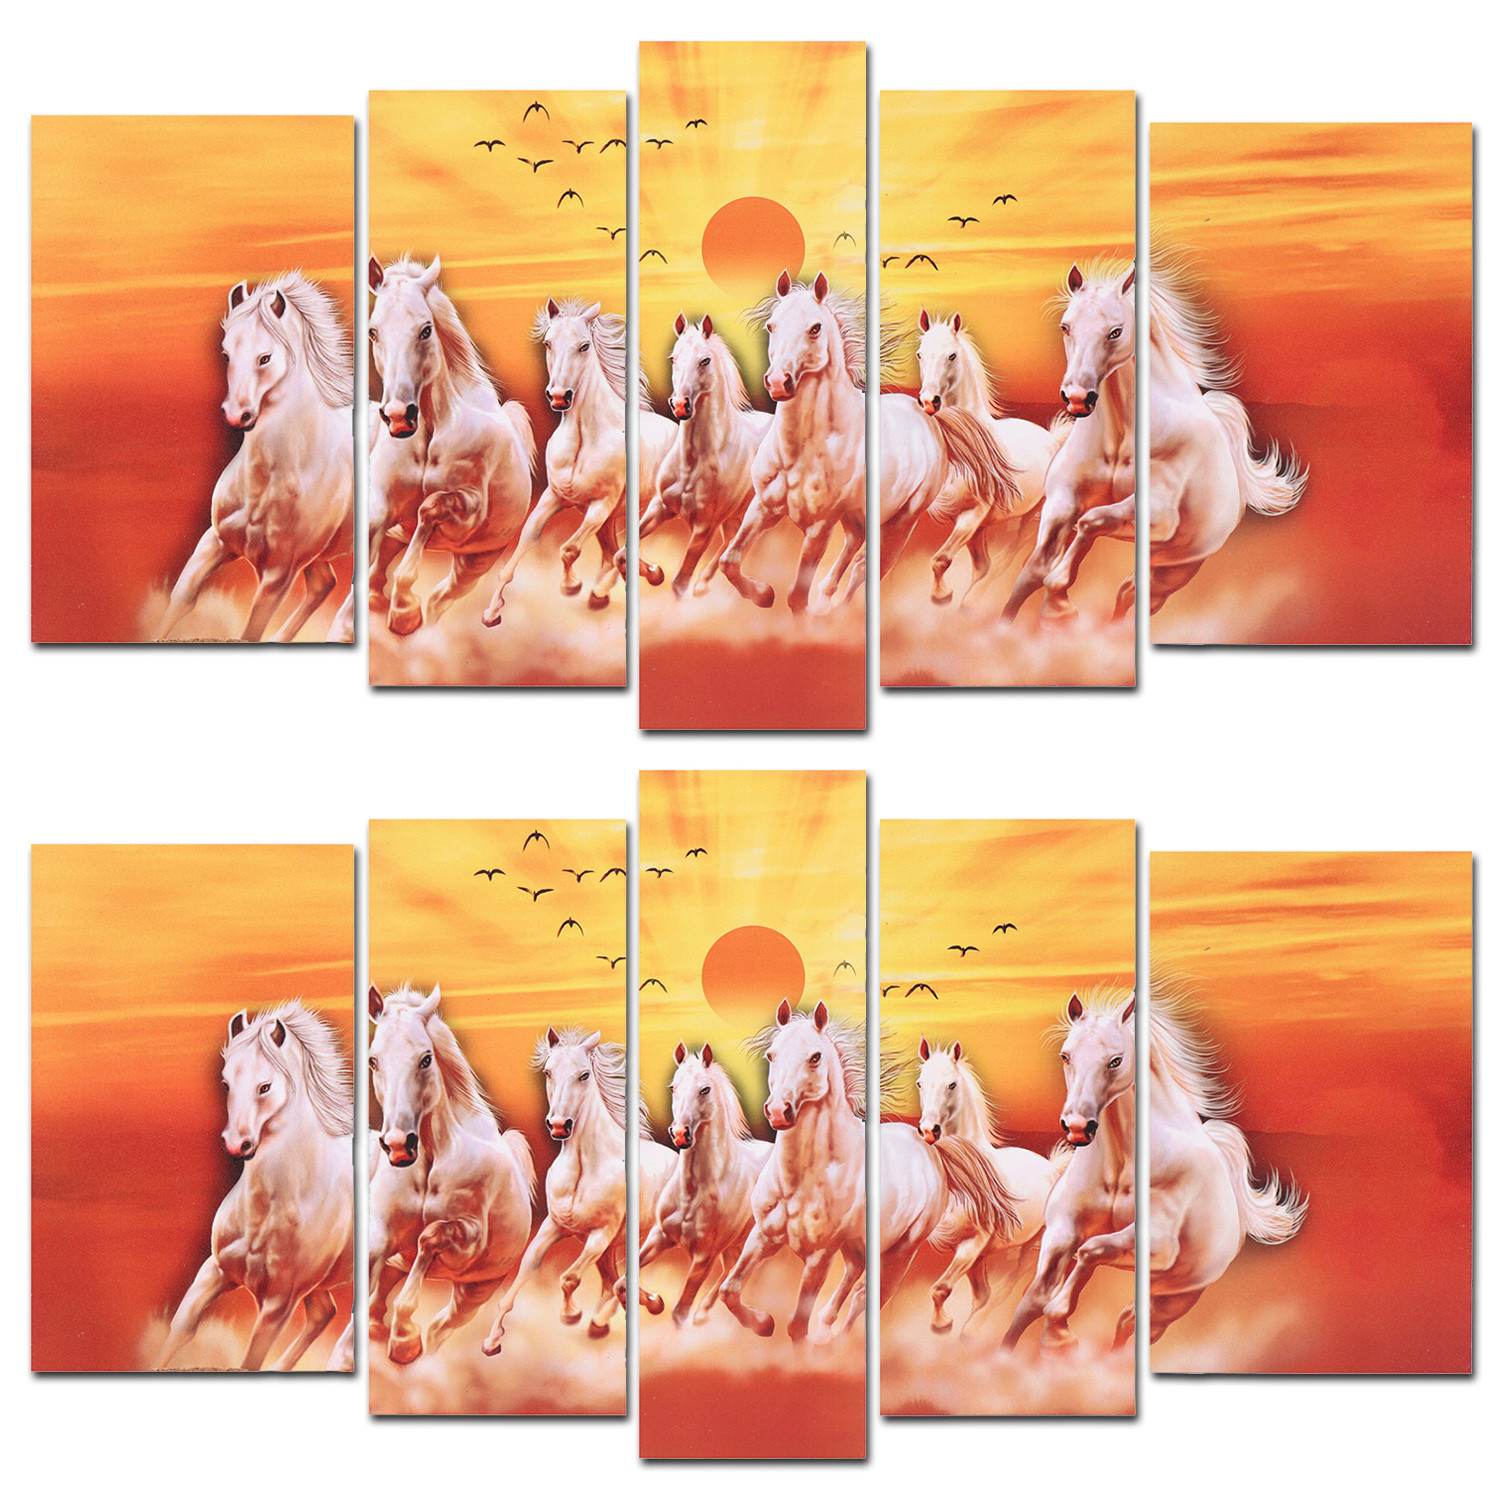 Kuber Industries Wall Paintings | MDF Wooden Wall Art for Living Room |Wall Sculpture | Horse Painting for Bedroom | Office | Hotels | Gift | 1730KIH4| Orange